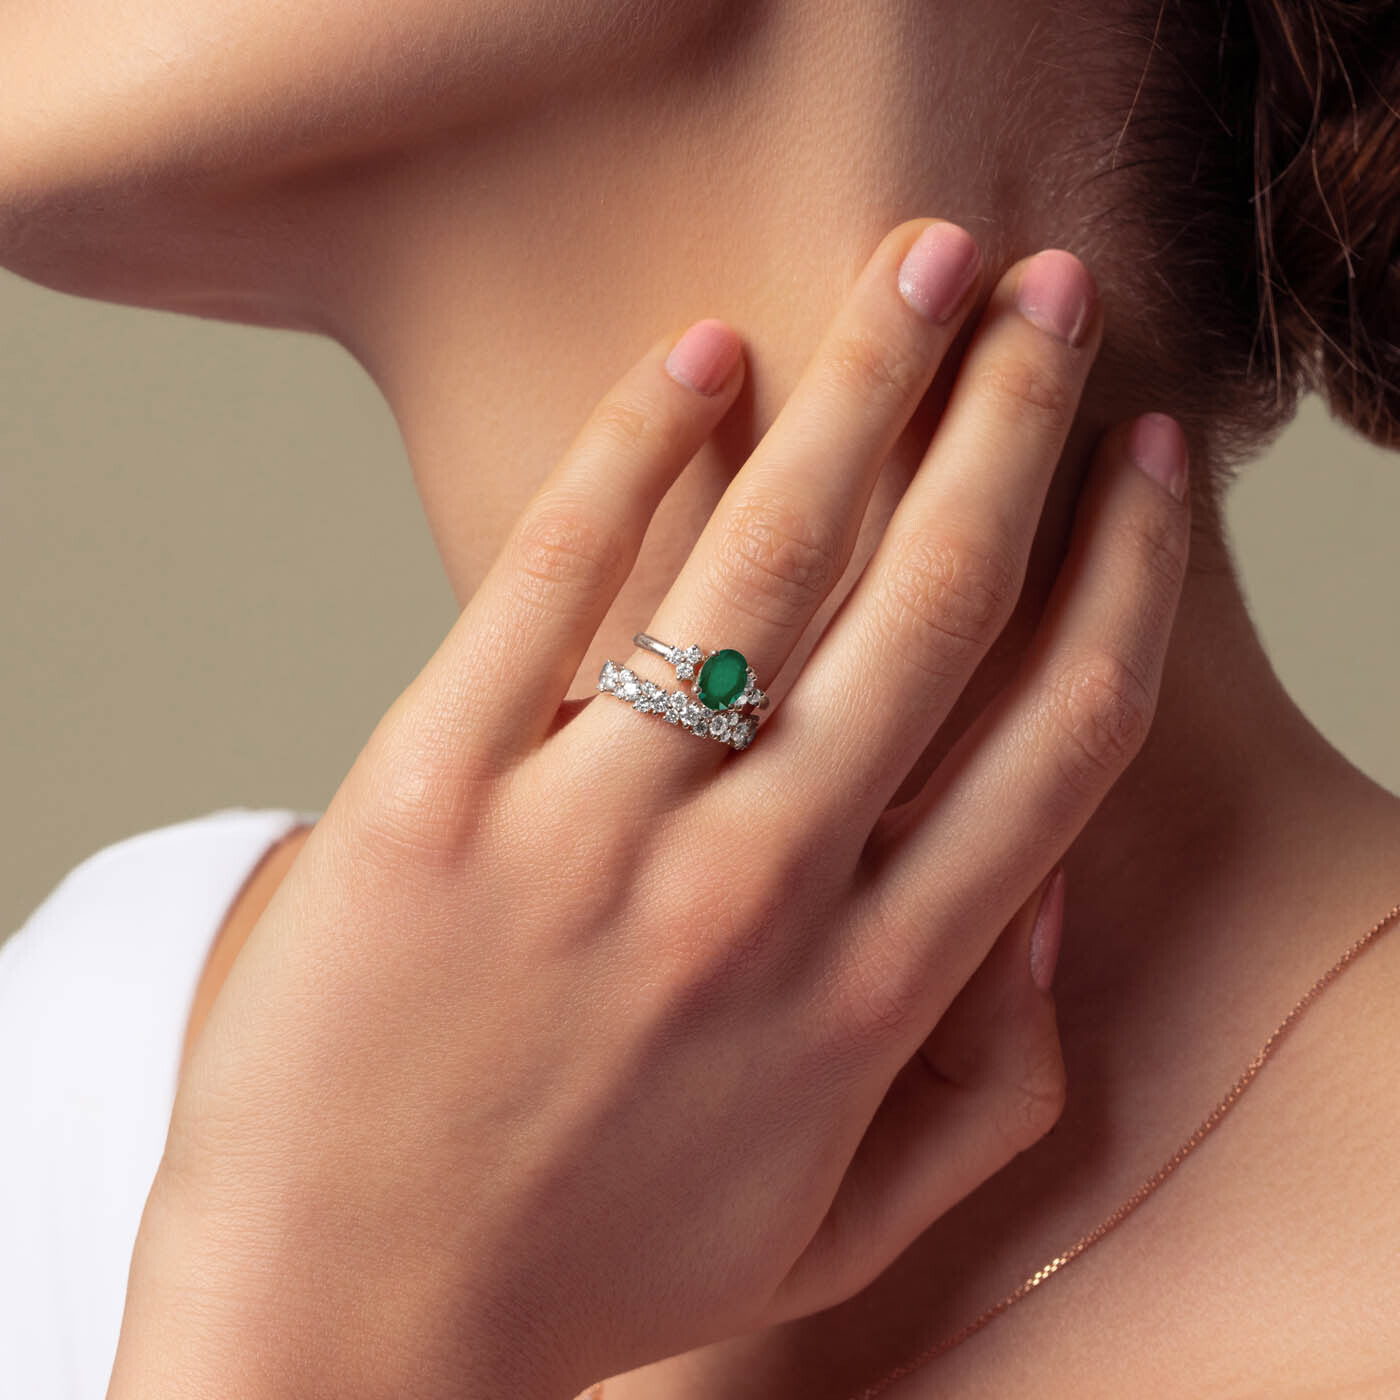 Emerald Engagement Rings and Wedding Bands: The Handy Guide Before You Buy